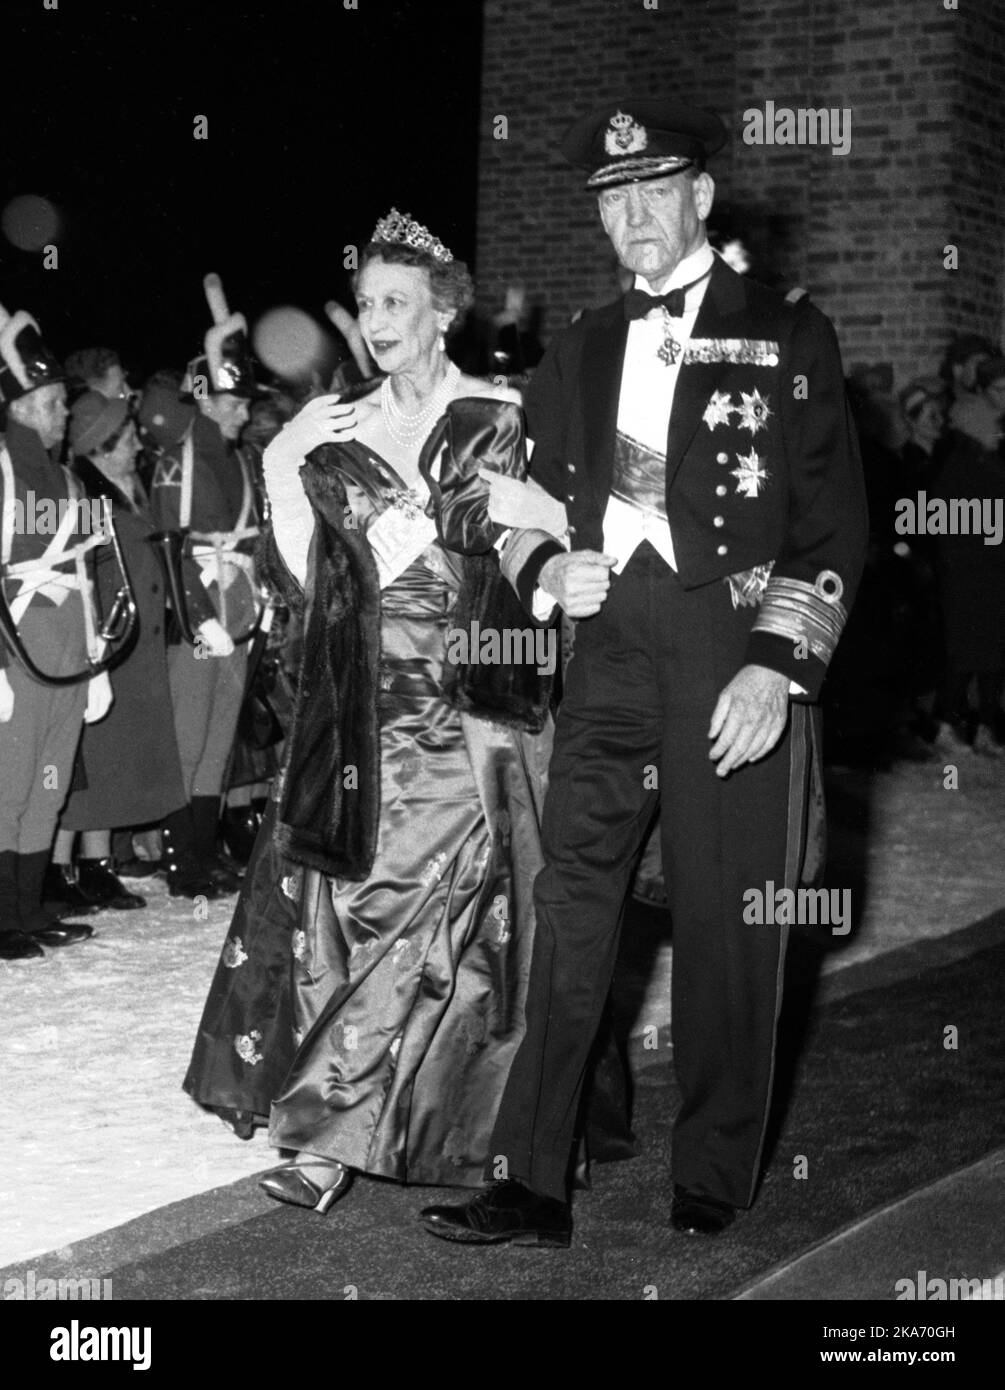 Princess Astrid's wedding. The guests leave the church. Here Princess Margaretha of Denmark who is the bride's aunt. She is accompanied by her husband, Prince Axel of Denmark. Margaretha wearing diadem / tiara. (Princess Margaretha was Princess at the time of birth both of Sweden and Norway. Later she became a princess of Sweden, and after she married: Princess of Denmark.) Photo: NTB / SCANPIX Stock Photo